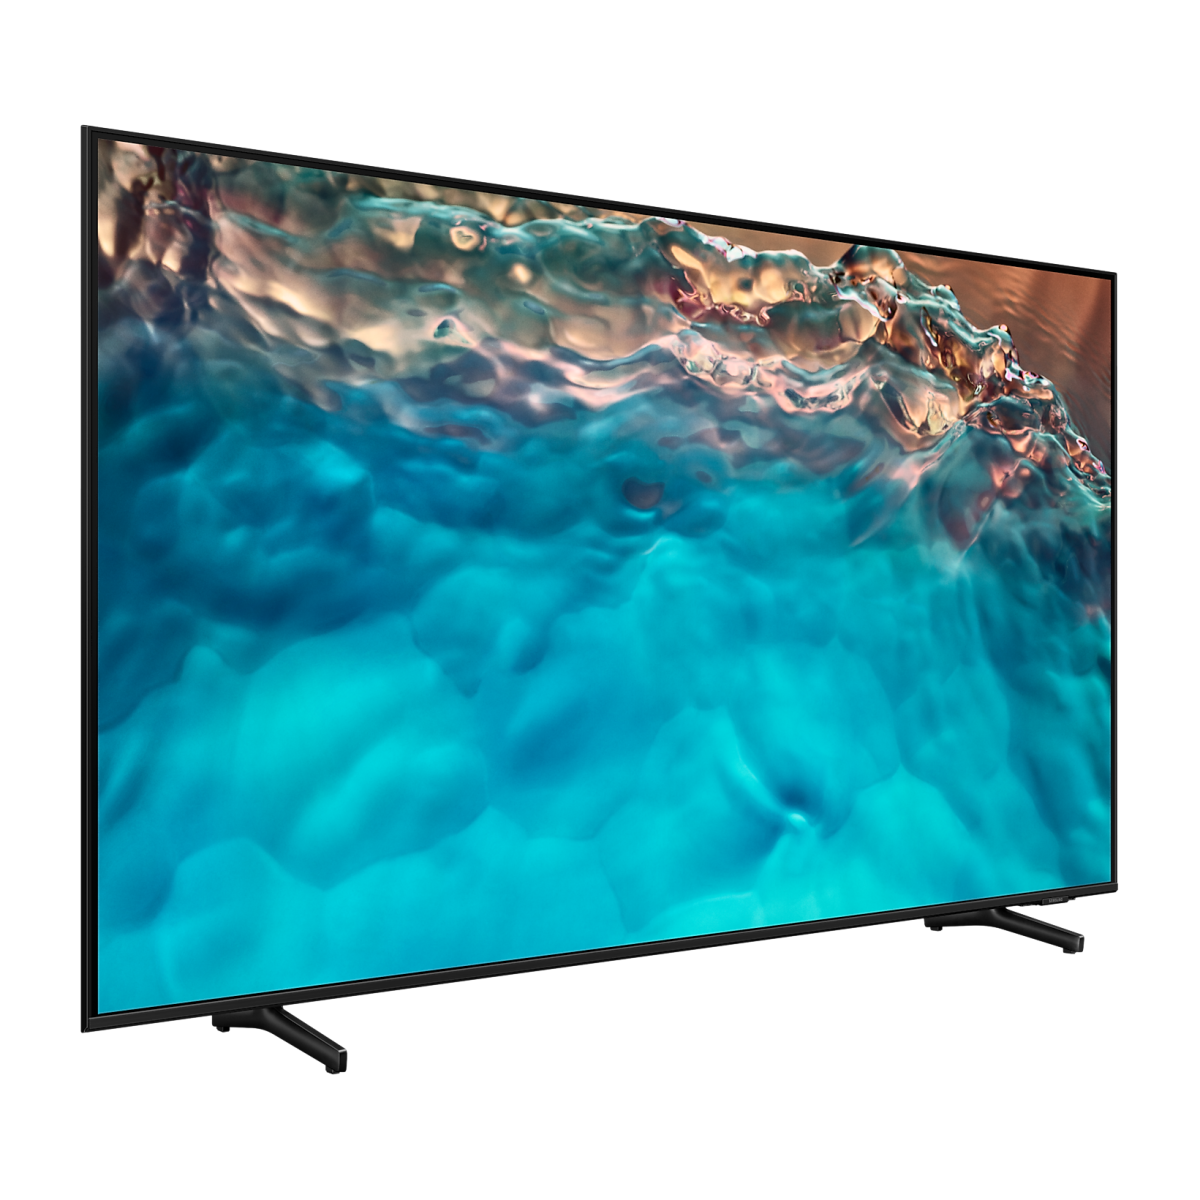 SAMSUNG 85" Crystal 4K Smart UHD TV UA85BU8000RSFS , Best TVs of Year, Top-rated TVs, TV Reviews, TV Comparison, Buying a TV Guide, TV Deals and Offers SAMSUNG 75" Crystal 4K Smart UHD TV UA75BU8000RSFS , Best TVs of Year, Top-rated TVs, TV Reviews, TV Comparison, Buying a TV Guide, TV Deals and Offers SAMSUNG 65" Crystal 4K Smart UHD TV UA65BU8000RSFS , Best TVs of Year, Top-rated TVs, TV Reviews, TV Comparison, Buying a TV Guide, TV Deals and Offers SAMSUNG 50" Crystal 4K Smart UHD TV UA50BU8000RSFS , Best TVs of Year, Top-rated TVs, TV Reviews, TV Comparison, Buying a TV Guide, TV Deals and Offers Best TVs of Year, Top-rated TVs, TV Reviews, TV Comparison, Buying a TV Guide, TV Deals and Offers Best TV in Chittagong, Best selling TV in Chittagong, Best Electronics Store in Chittagong, Meem Electronics, MeemElectronics, Best Deal of TV, SAMSUNG TV price in Bangladersh, SAMSUNG TV price in Chittagong, SAMSUNG TV price in CTG, 85 Inch TV, SAMSUNG TV, 01919382008, 01919382009, 019193820010 Best TVs of Year, Top-rated TVs, TV Reviews, TV Comparison, Buying a TV Guide, TV Deals and Offers Best TV in Chittagong, Best selling TV in Chittagong, Best Electronics Store in Chittagong, Meem Electronics, MeemElectronics, Best Deal of TV, SAMSUNG TV price in Bangladersh, SAMSUNG TV price in Chittagong, SAMSUNG TV price in CTG, 75 Inch TV, SAMSUNG TV, 01919382008, 01919382009, 019193820010 Best TVs of Year, Top-rated TVs, TV Reviews, TV Comparison, Buying a TV Guide, TV Deals and Offers Best TV in Chittagong, Best selling TV in Chittagong, Best Electronics Store in Chittagong, Meem Electronics, MeemElectronics, Best Deal of TV, SAMSUNG TV price in Bangladersh, SAMSUNG TV price in Chittagong, SAMSUNG TV price in CTG, 65 Inch TV, SAMSUNG TV, 01919382008, 01919382009, 019193820010 SAMSUNG 55" Crystal 4K Smart UHD TV UA55BU8000RSFS , Best TVs of Year, Top-rated TVs, TV Reviews, TV Comparison, Buying a TV Guide, TV Deals and Offers Best TV in Chittagong, Best selling TV in Chittagong, Best Electronics Store in Chittagong, Meem Electronics, MeemElectronics, Best Deal of TV, SAMSUNG TV price in Bangladersh, SAMSUNG TV price in Chittagong, SAMSUNG TV price in CTG, 65 Inch TV, SAMSUNG TV, 01919382008, 01919382009, 019193820010 55 Inch TV, SAMSUNG 50" Crystal 4K Smart UHD TV UA50BU8000RSFS , Best TVs of Year, Top-rated TVs, TV Reviews, TV Comparison, Buying a TV Guide, TV Deals and Offers Best TV in Chittagong, Best selling TV in Chittagong, Best Electronics Store in Chittagong, Meem Electronics, MeemElectronics, Best Deal of TV, SAMSUNG TV price in Bangladersh, SAMSUNG TV price in Chittagong, SAMSUNG TV price in CTG, 50 Inch TV, SAMSUNG TV, 01919382008, 01919382009, 019193820010 SAMSUNG 43" Crystal 4K Smart UHD TV UA43BU8000RSFS , Best TVs of Year, Top-rated TVs, TV Reviews, TV Comparison, Buying a TV Guide, TV Deals and Offers Best TV in Chittagong, Best selling TV in Chittagong, Best Electronics Store in Chittagong, Meem Electronics, MeemElectronics, Best Deal of TV, SAMSUNG TV price in Bangladersh, SAMSUNG TV price in Chittagong, SAMSUNG TV price in CTG, 43 Inch TV, SAMSUNG TV, 01919382008, 01919382009, 019193820010